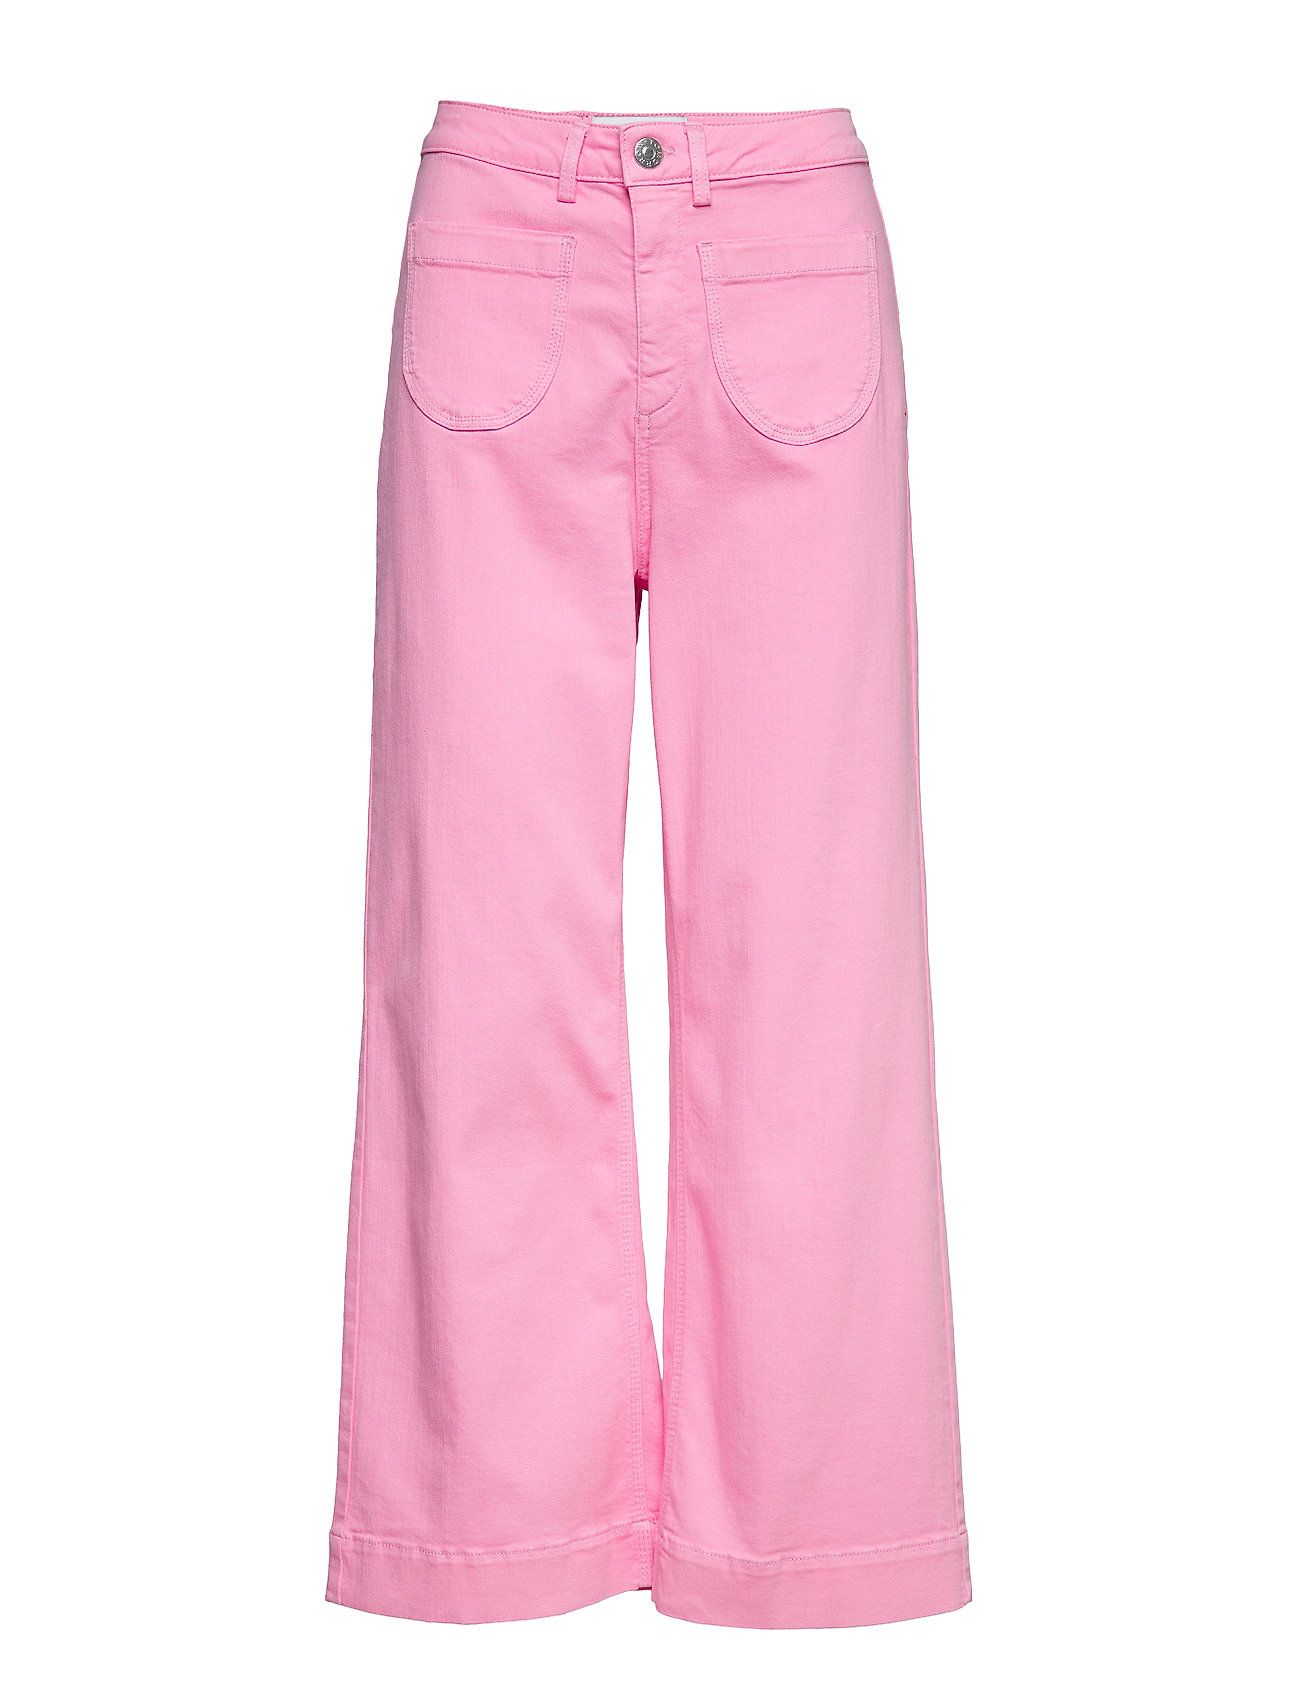 pink flare jeans